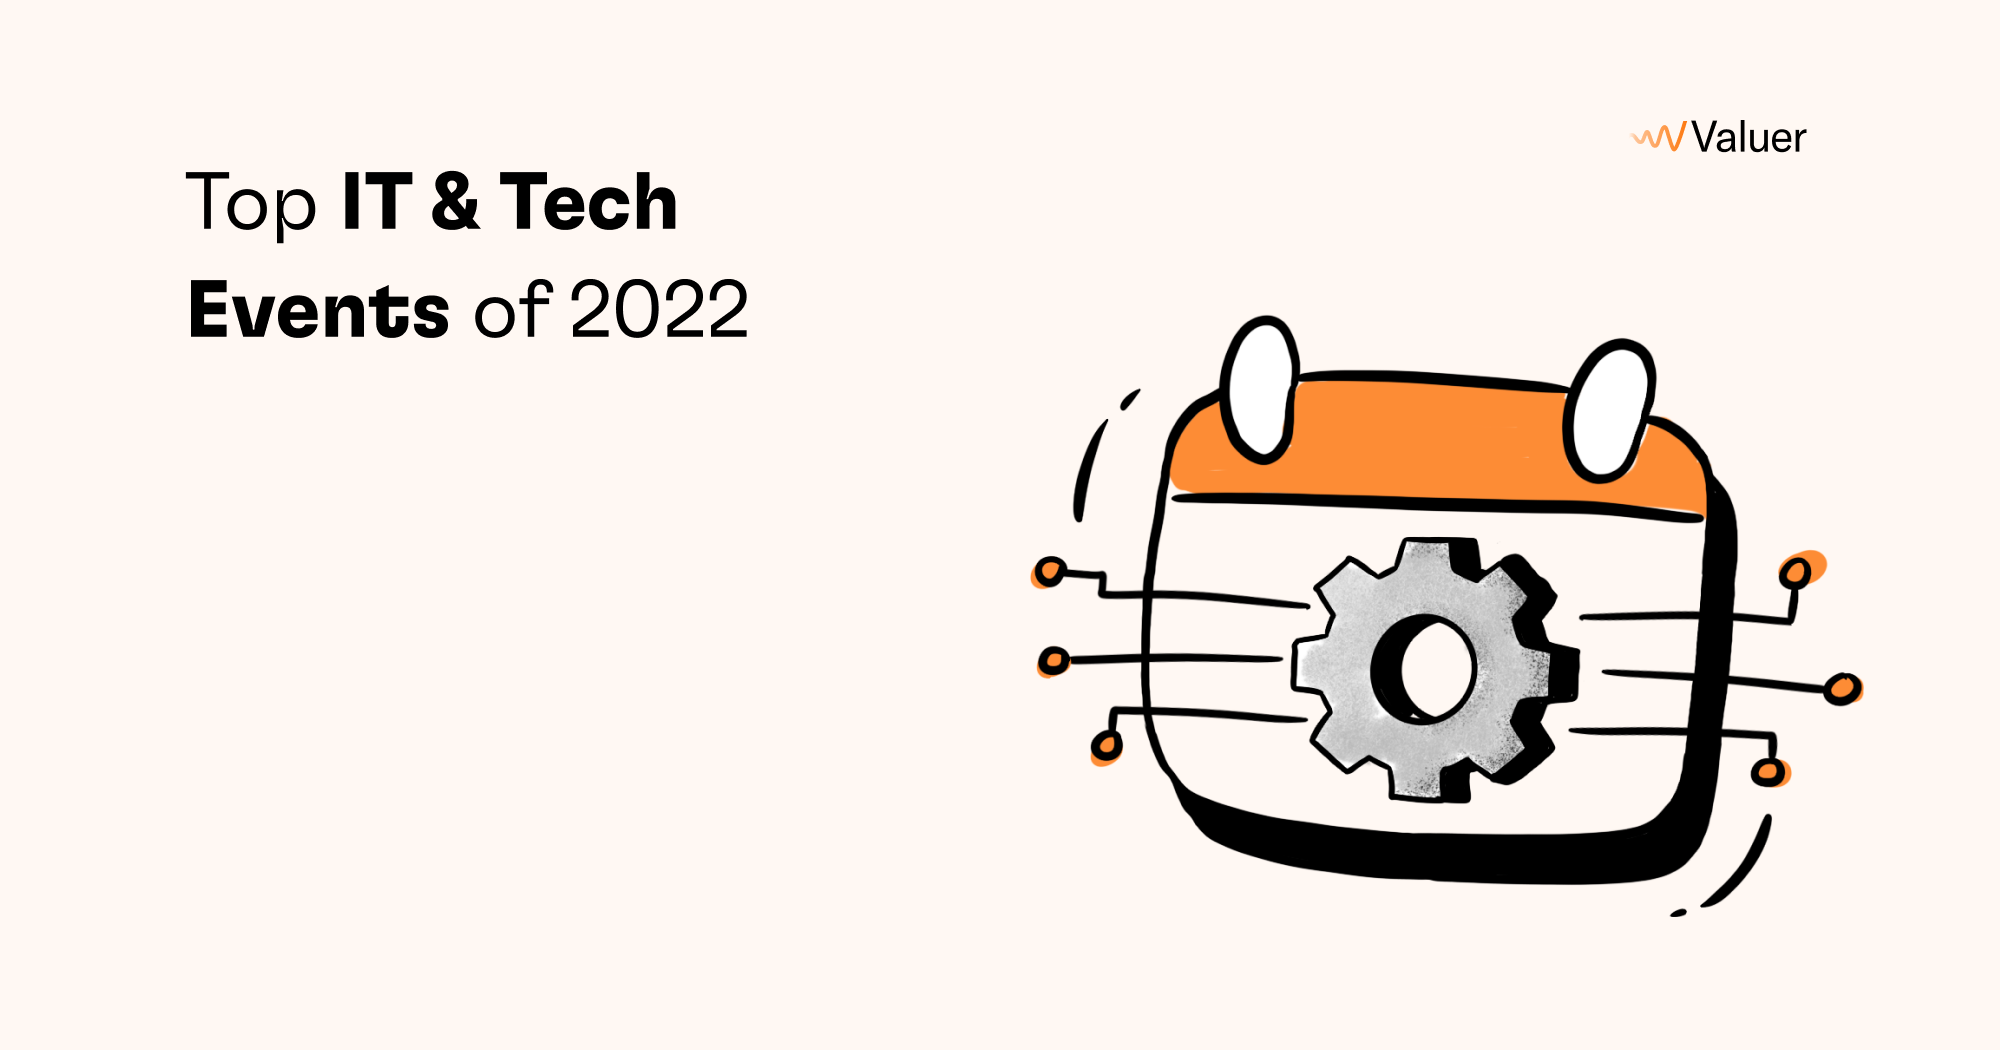 Top IT & Tech Events of 2022